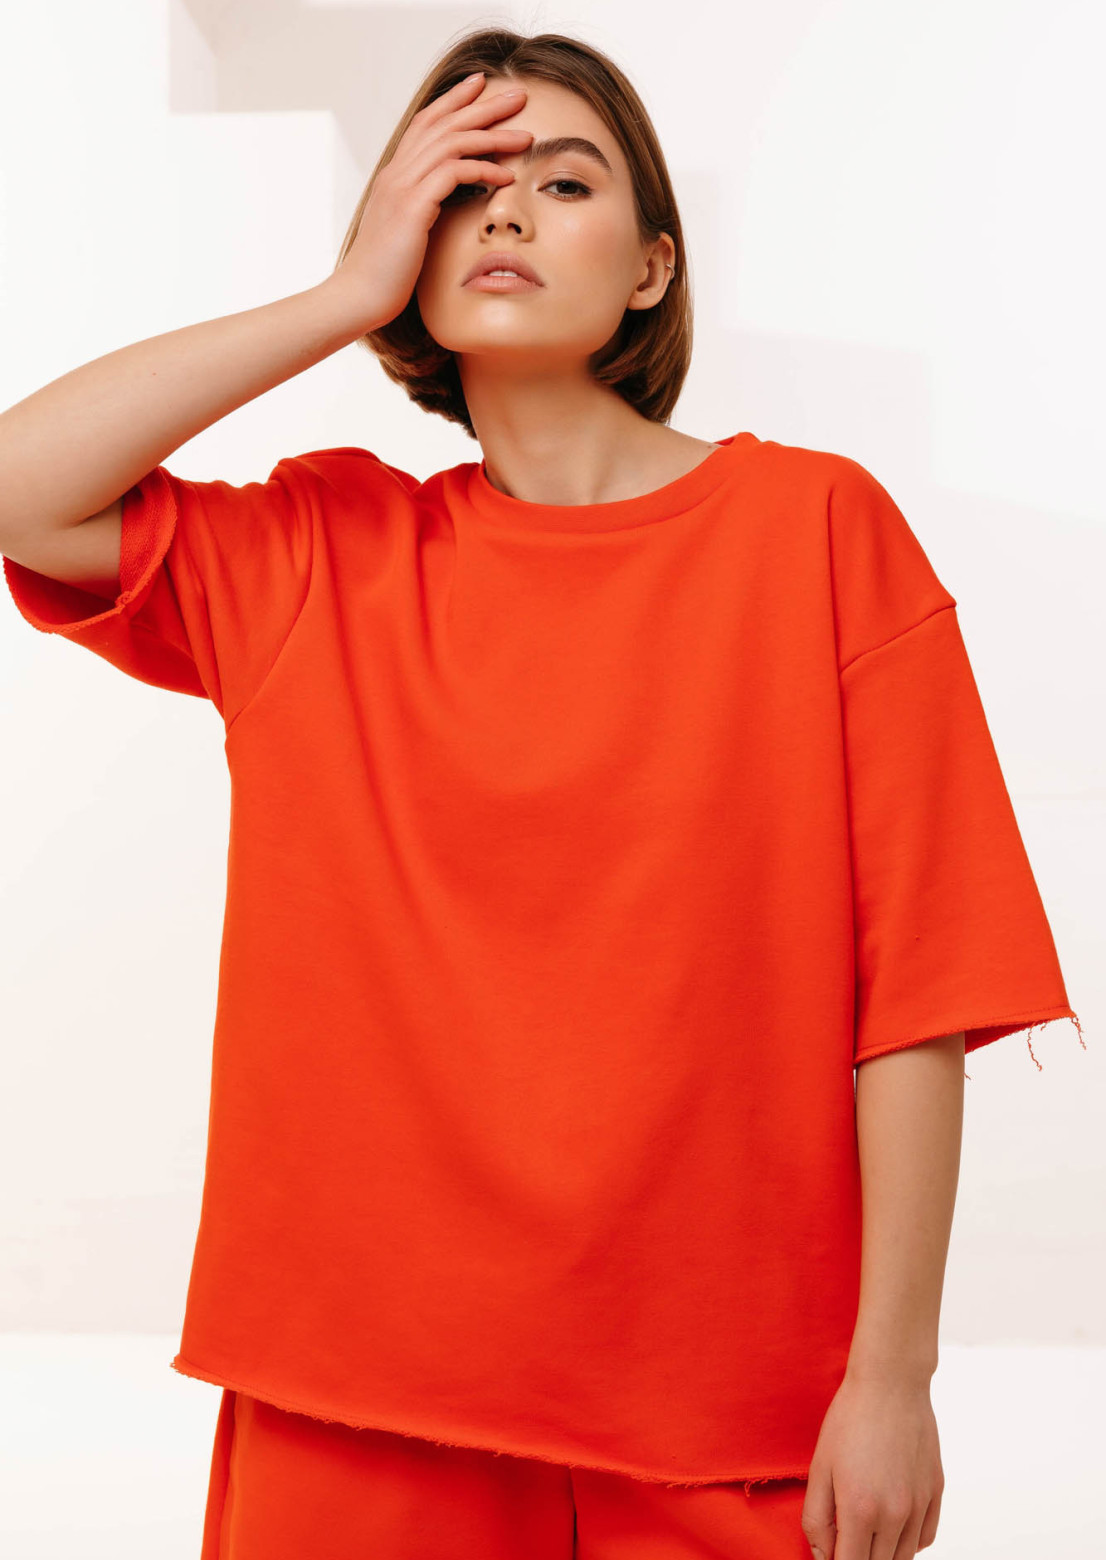 Сherry tomato color three-thread suit with shorts and t-shirt 